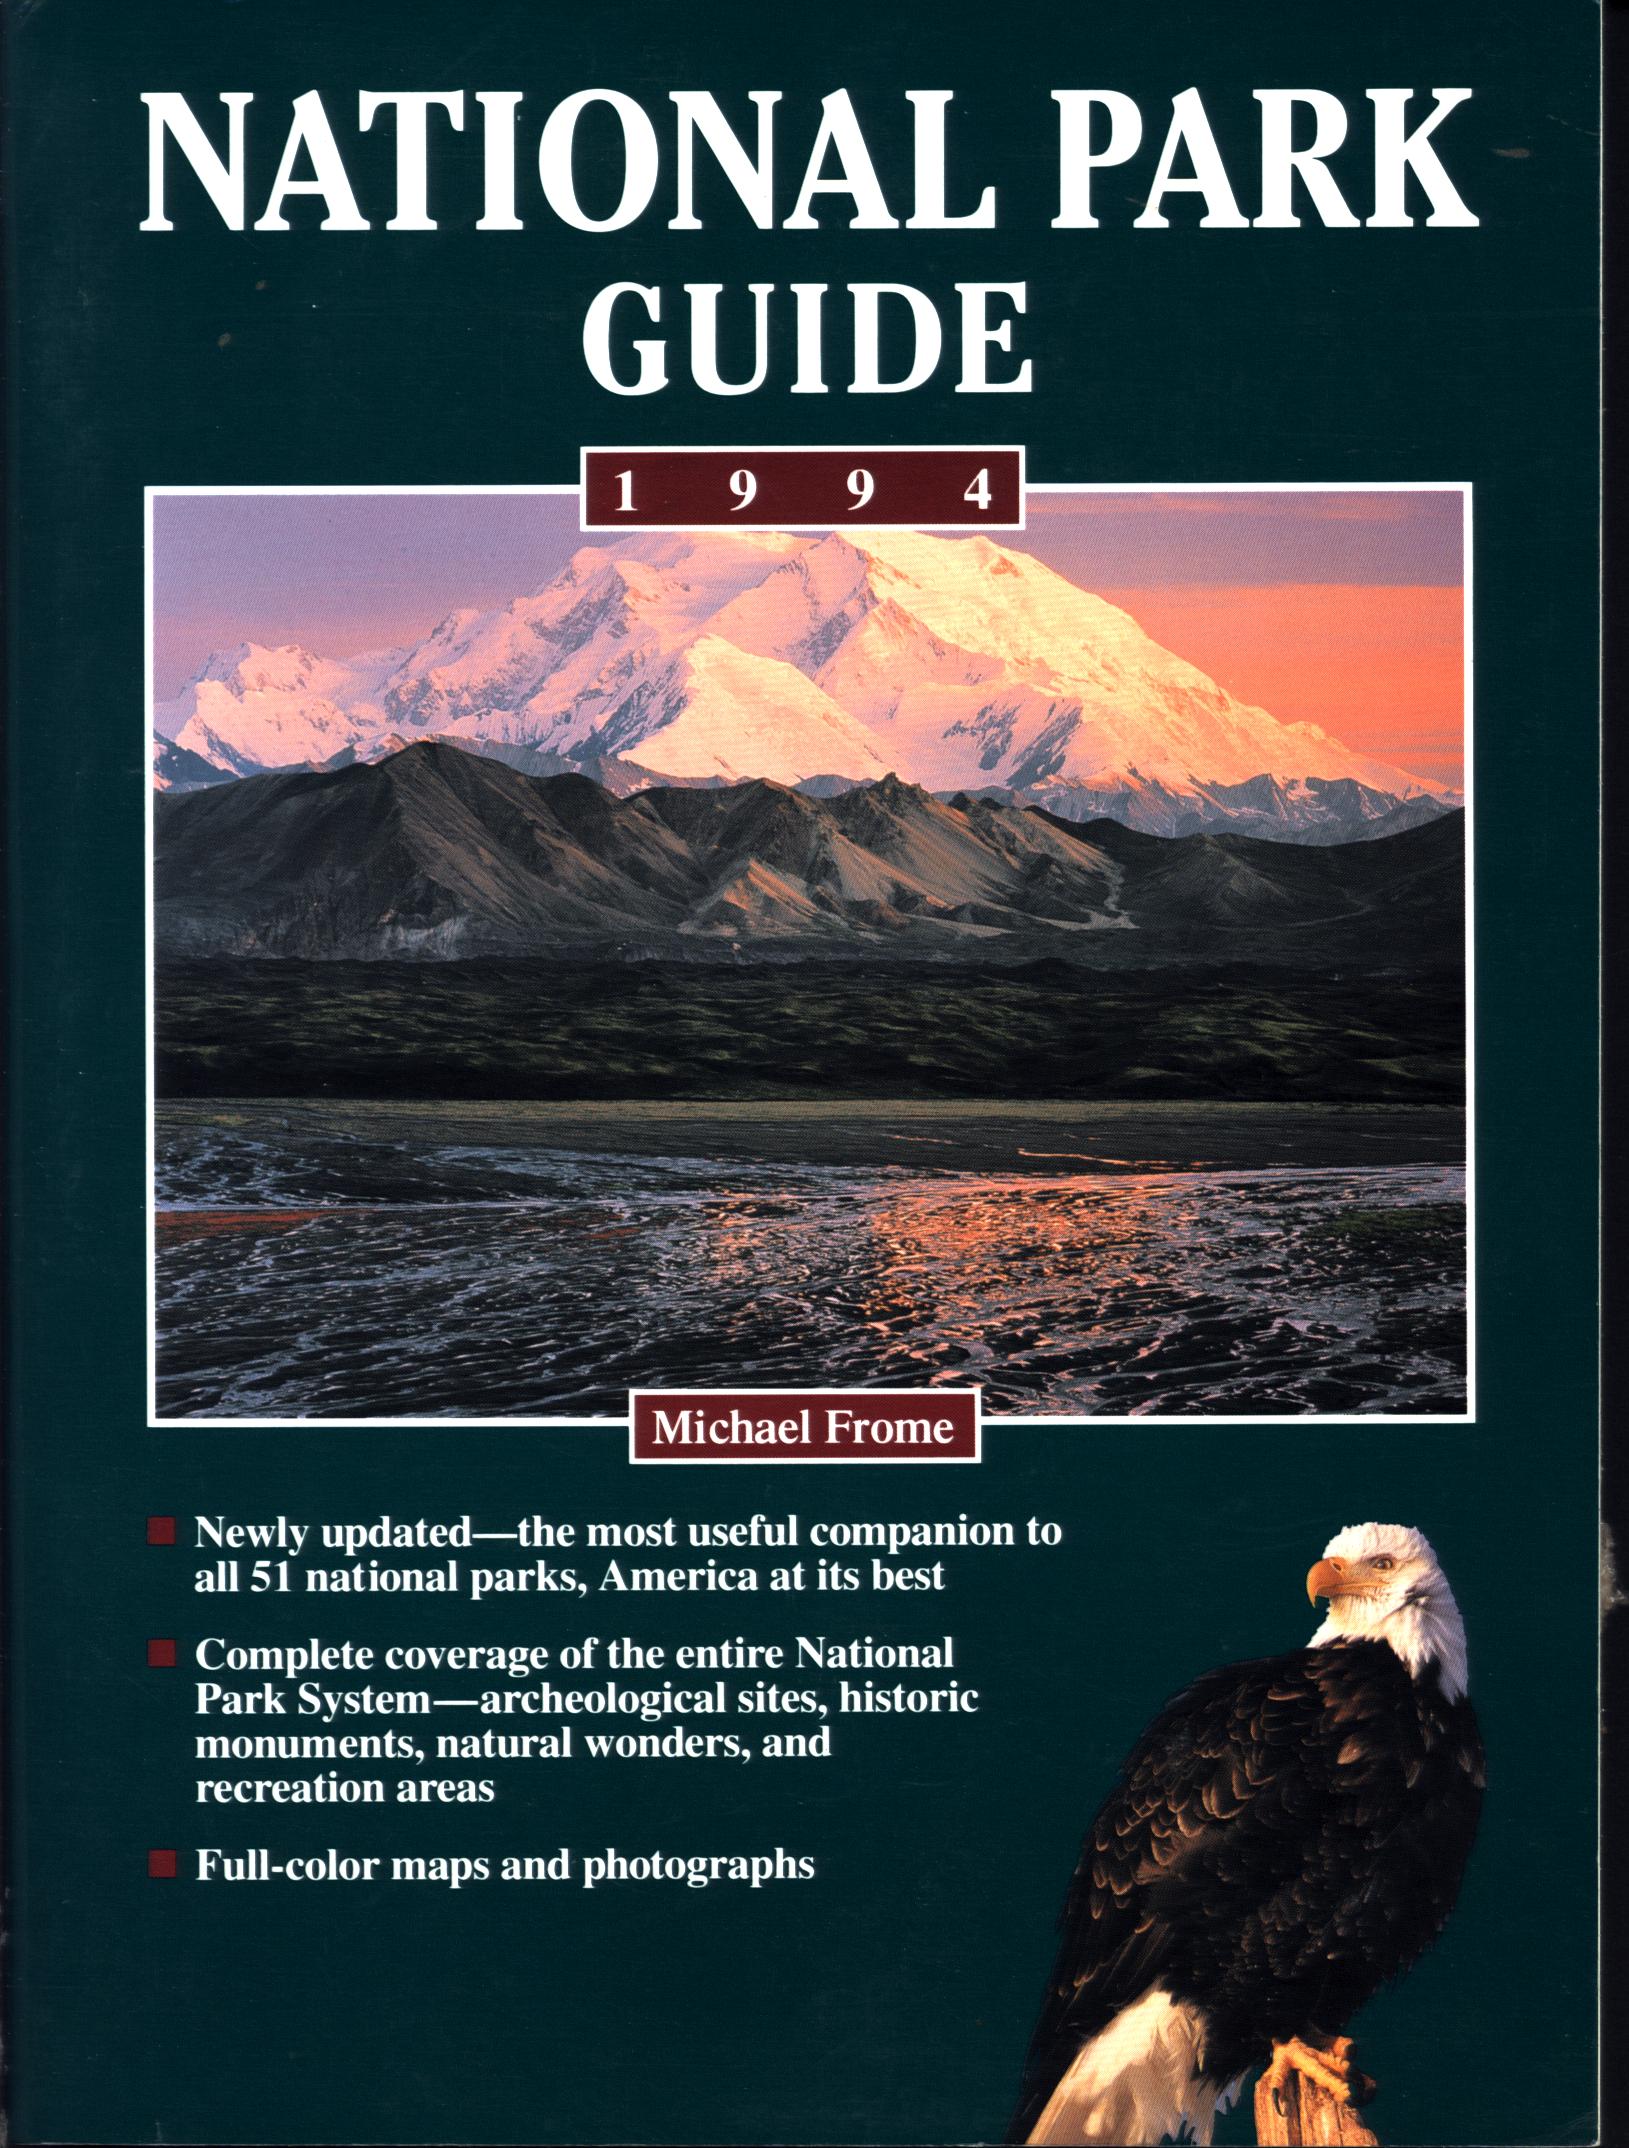 NATIONAL PARK GUIDE: 1994. 